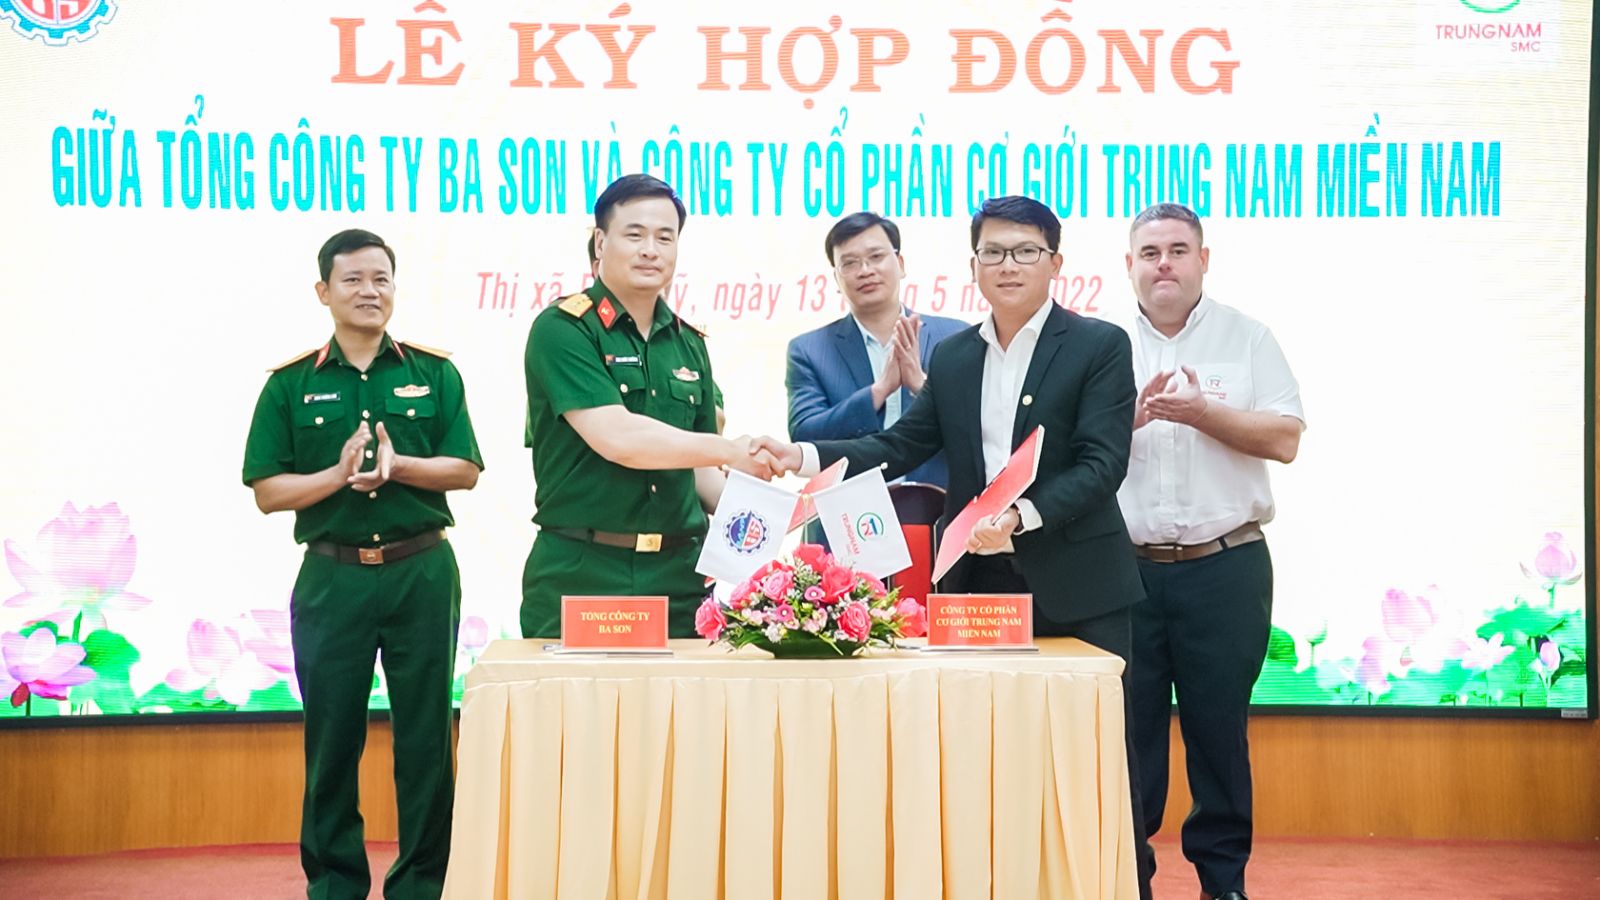 THE CONTRACT SIGNING BETWEEN BA SON CORPORATION AND TRUNGNAM SMC